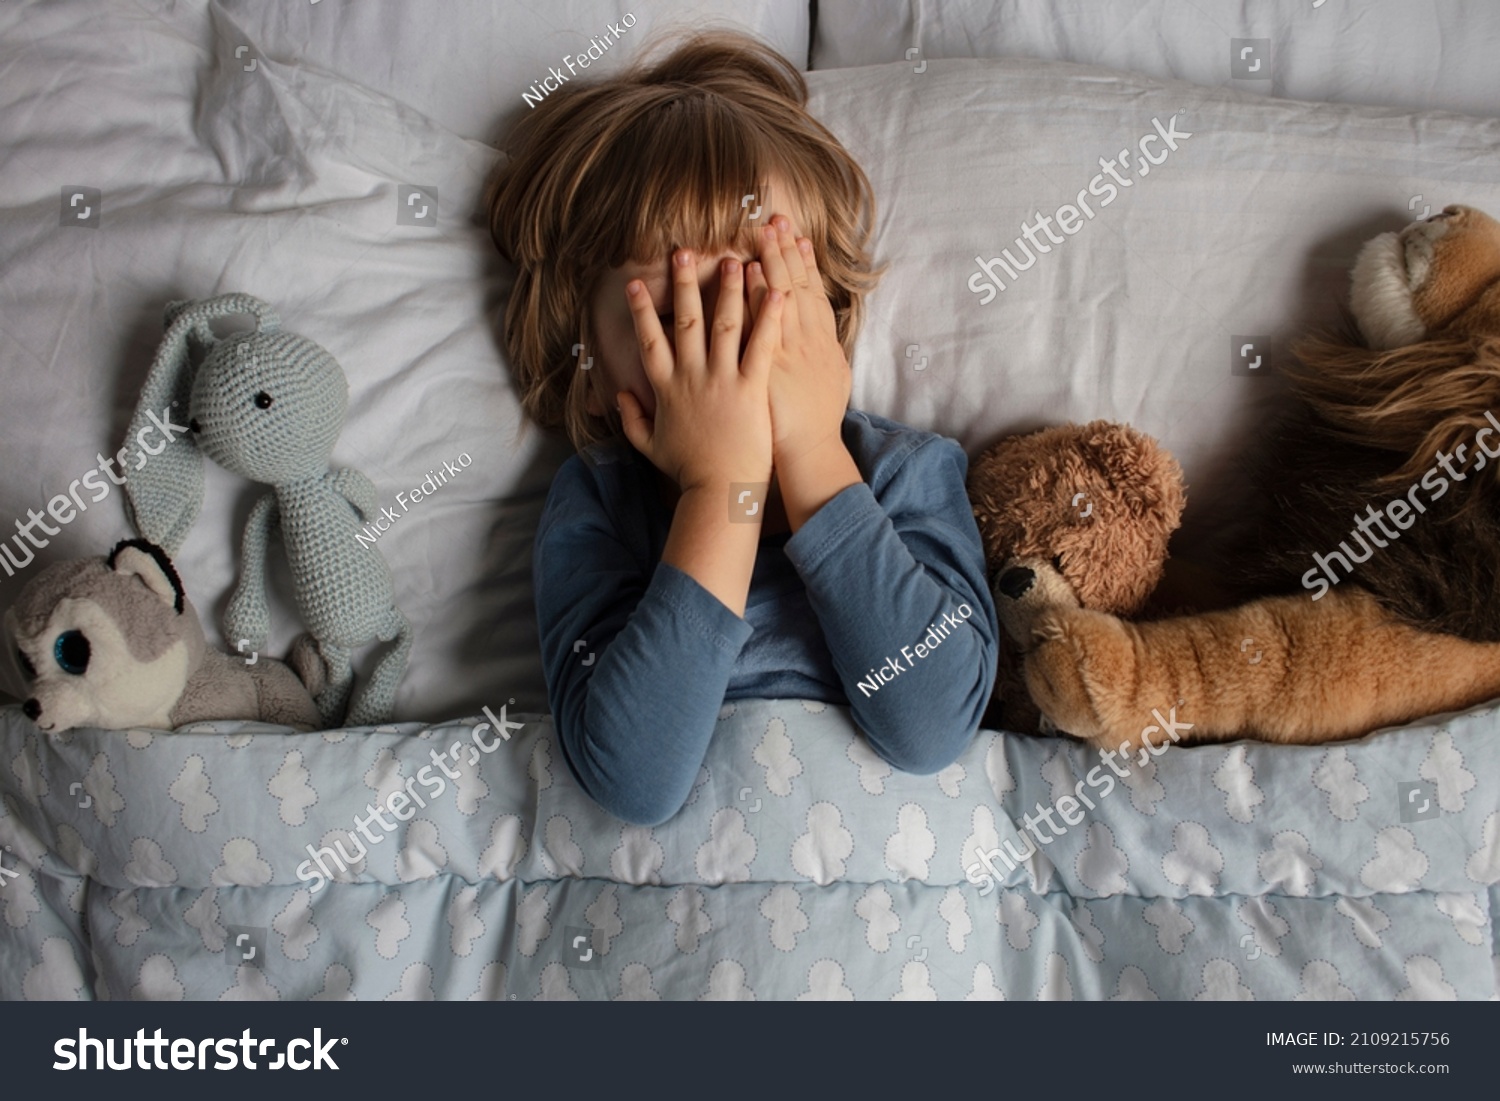 The child was scared before going to bed. Night terrors in a child. The kid covers his face with his hands in a fear. Children's experiences. Boy in the bed. View from above. Sad psychological state. #2109215756